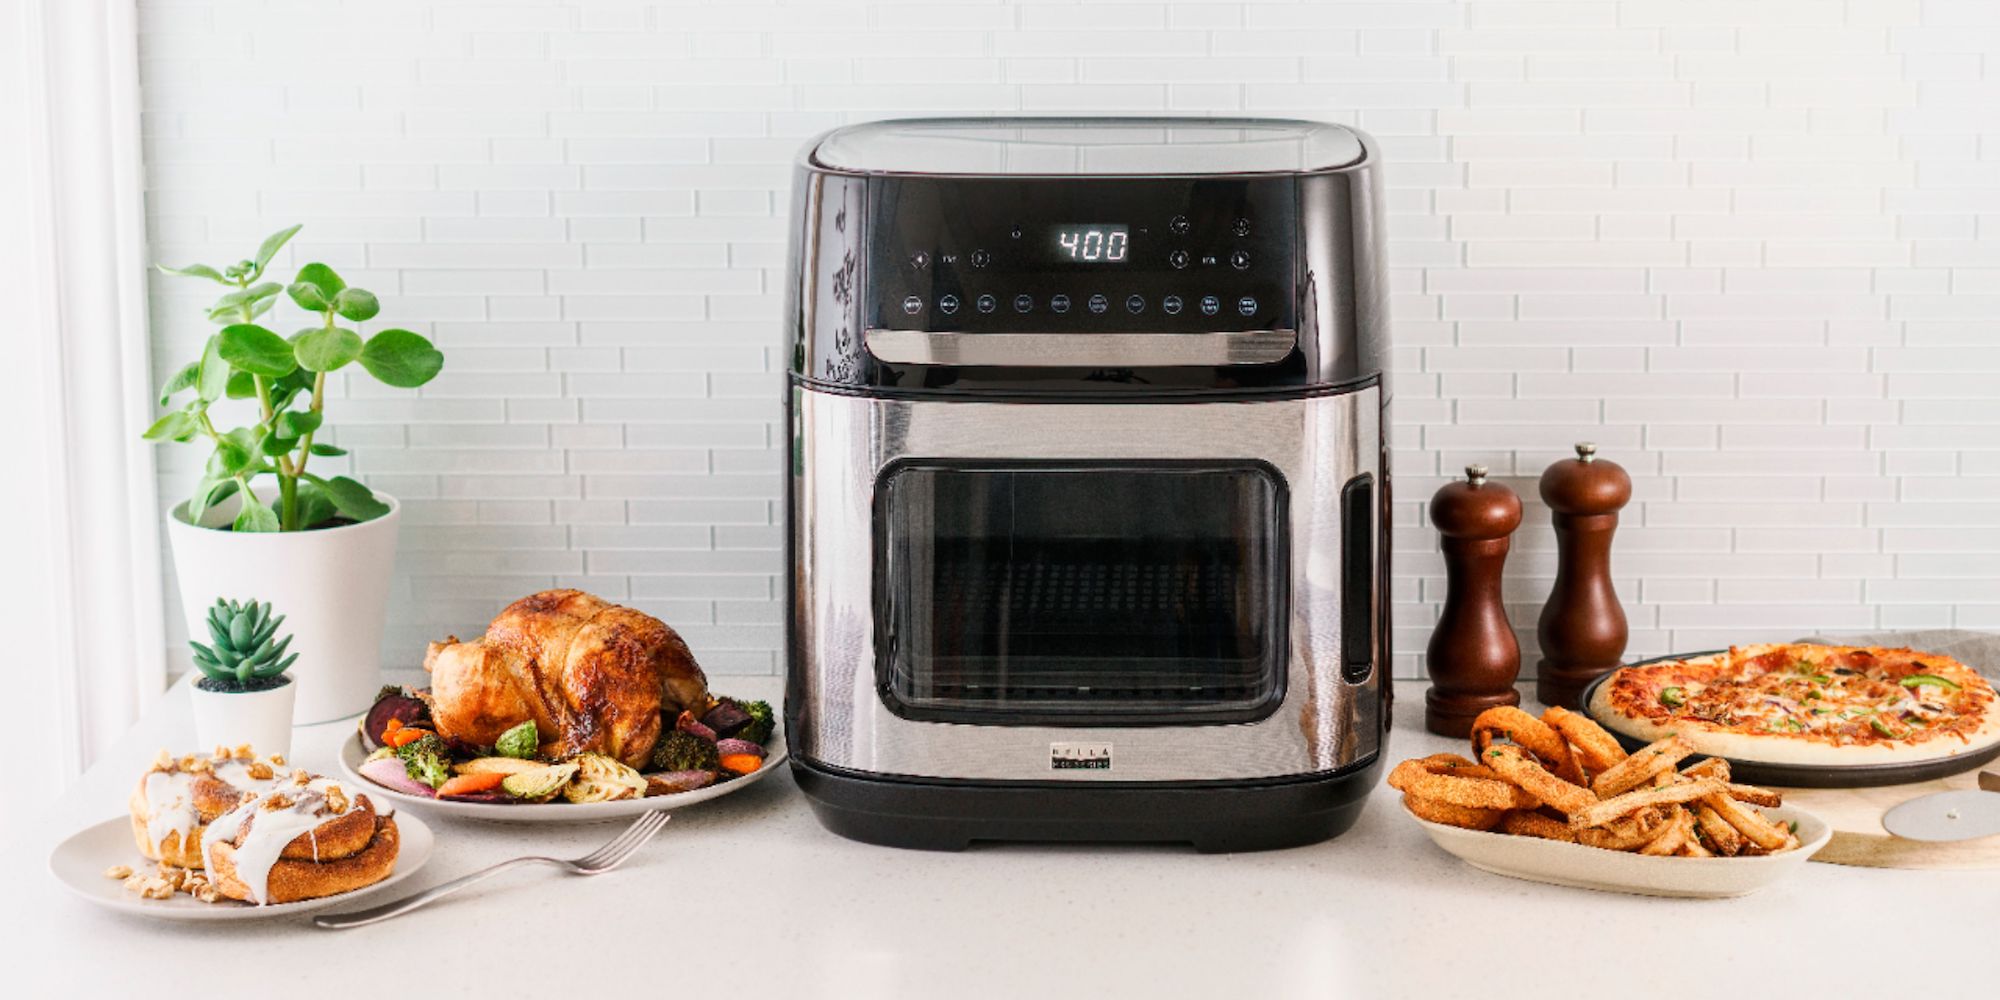 https://9to5toys.com/wp-content/uploads/sites/5/2021/02/Bella-Pro-Series-4-Slice-Convection-Toaster-Oven-and-Air-Fryer.jpg